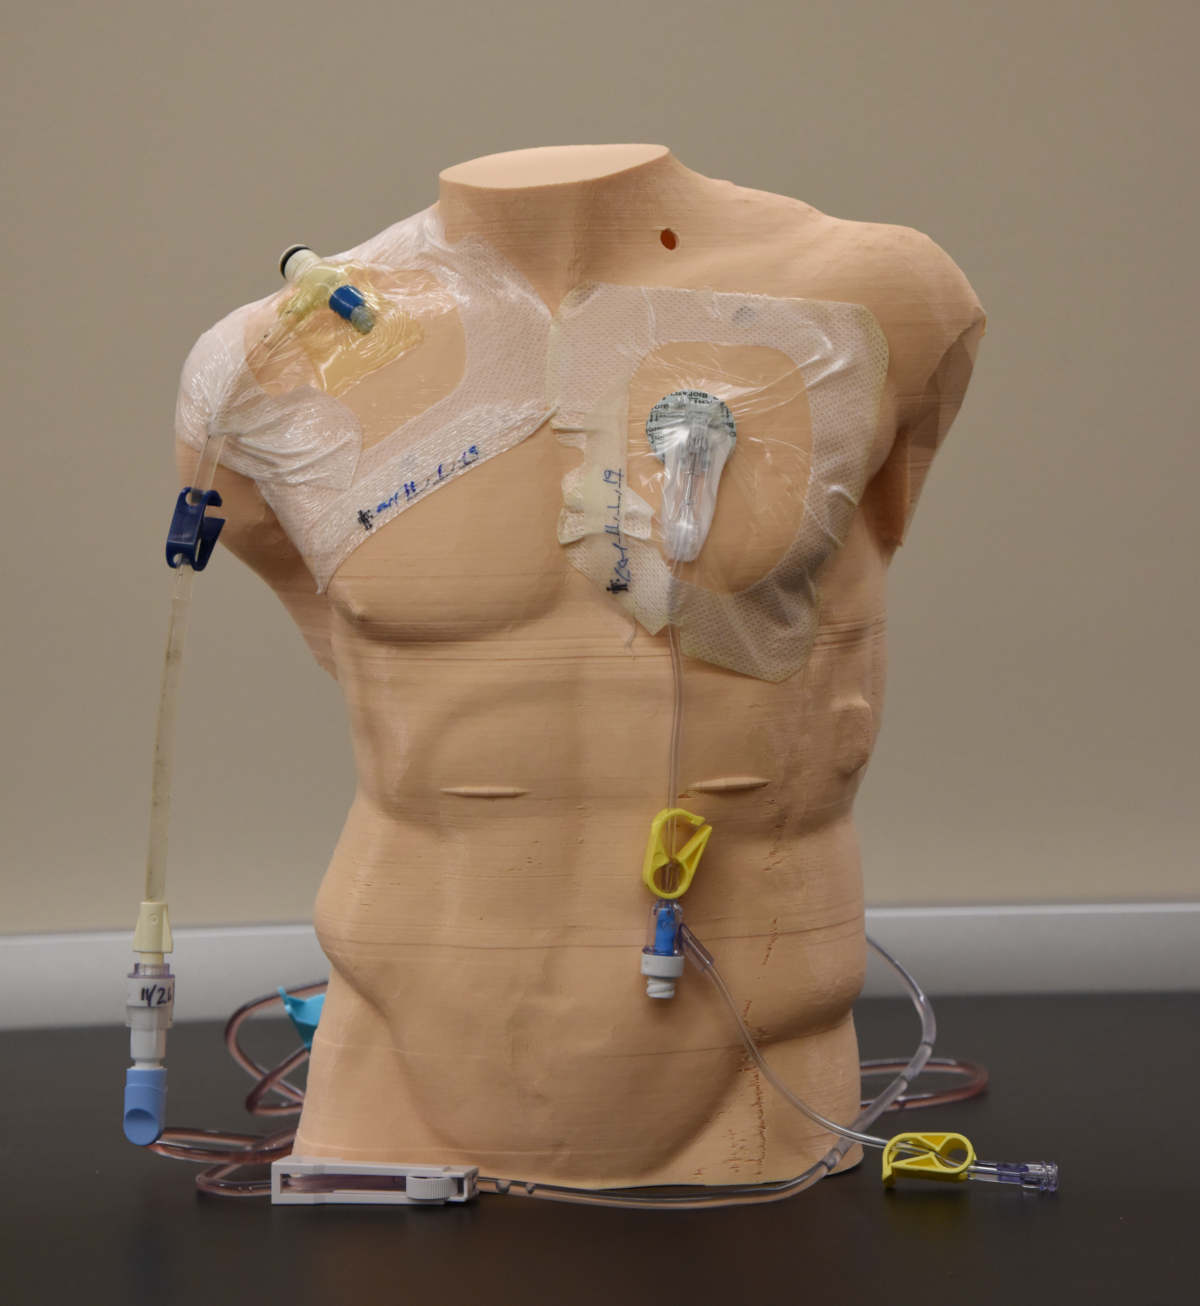 A 3D-printed torso used for training